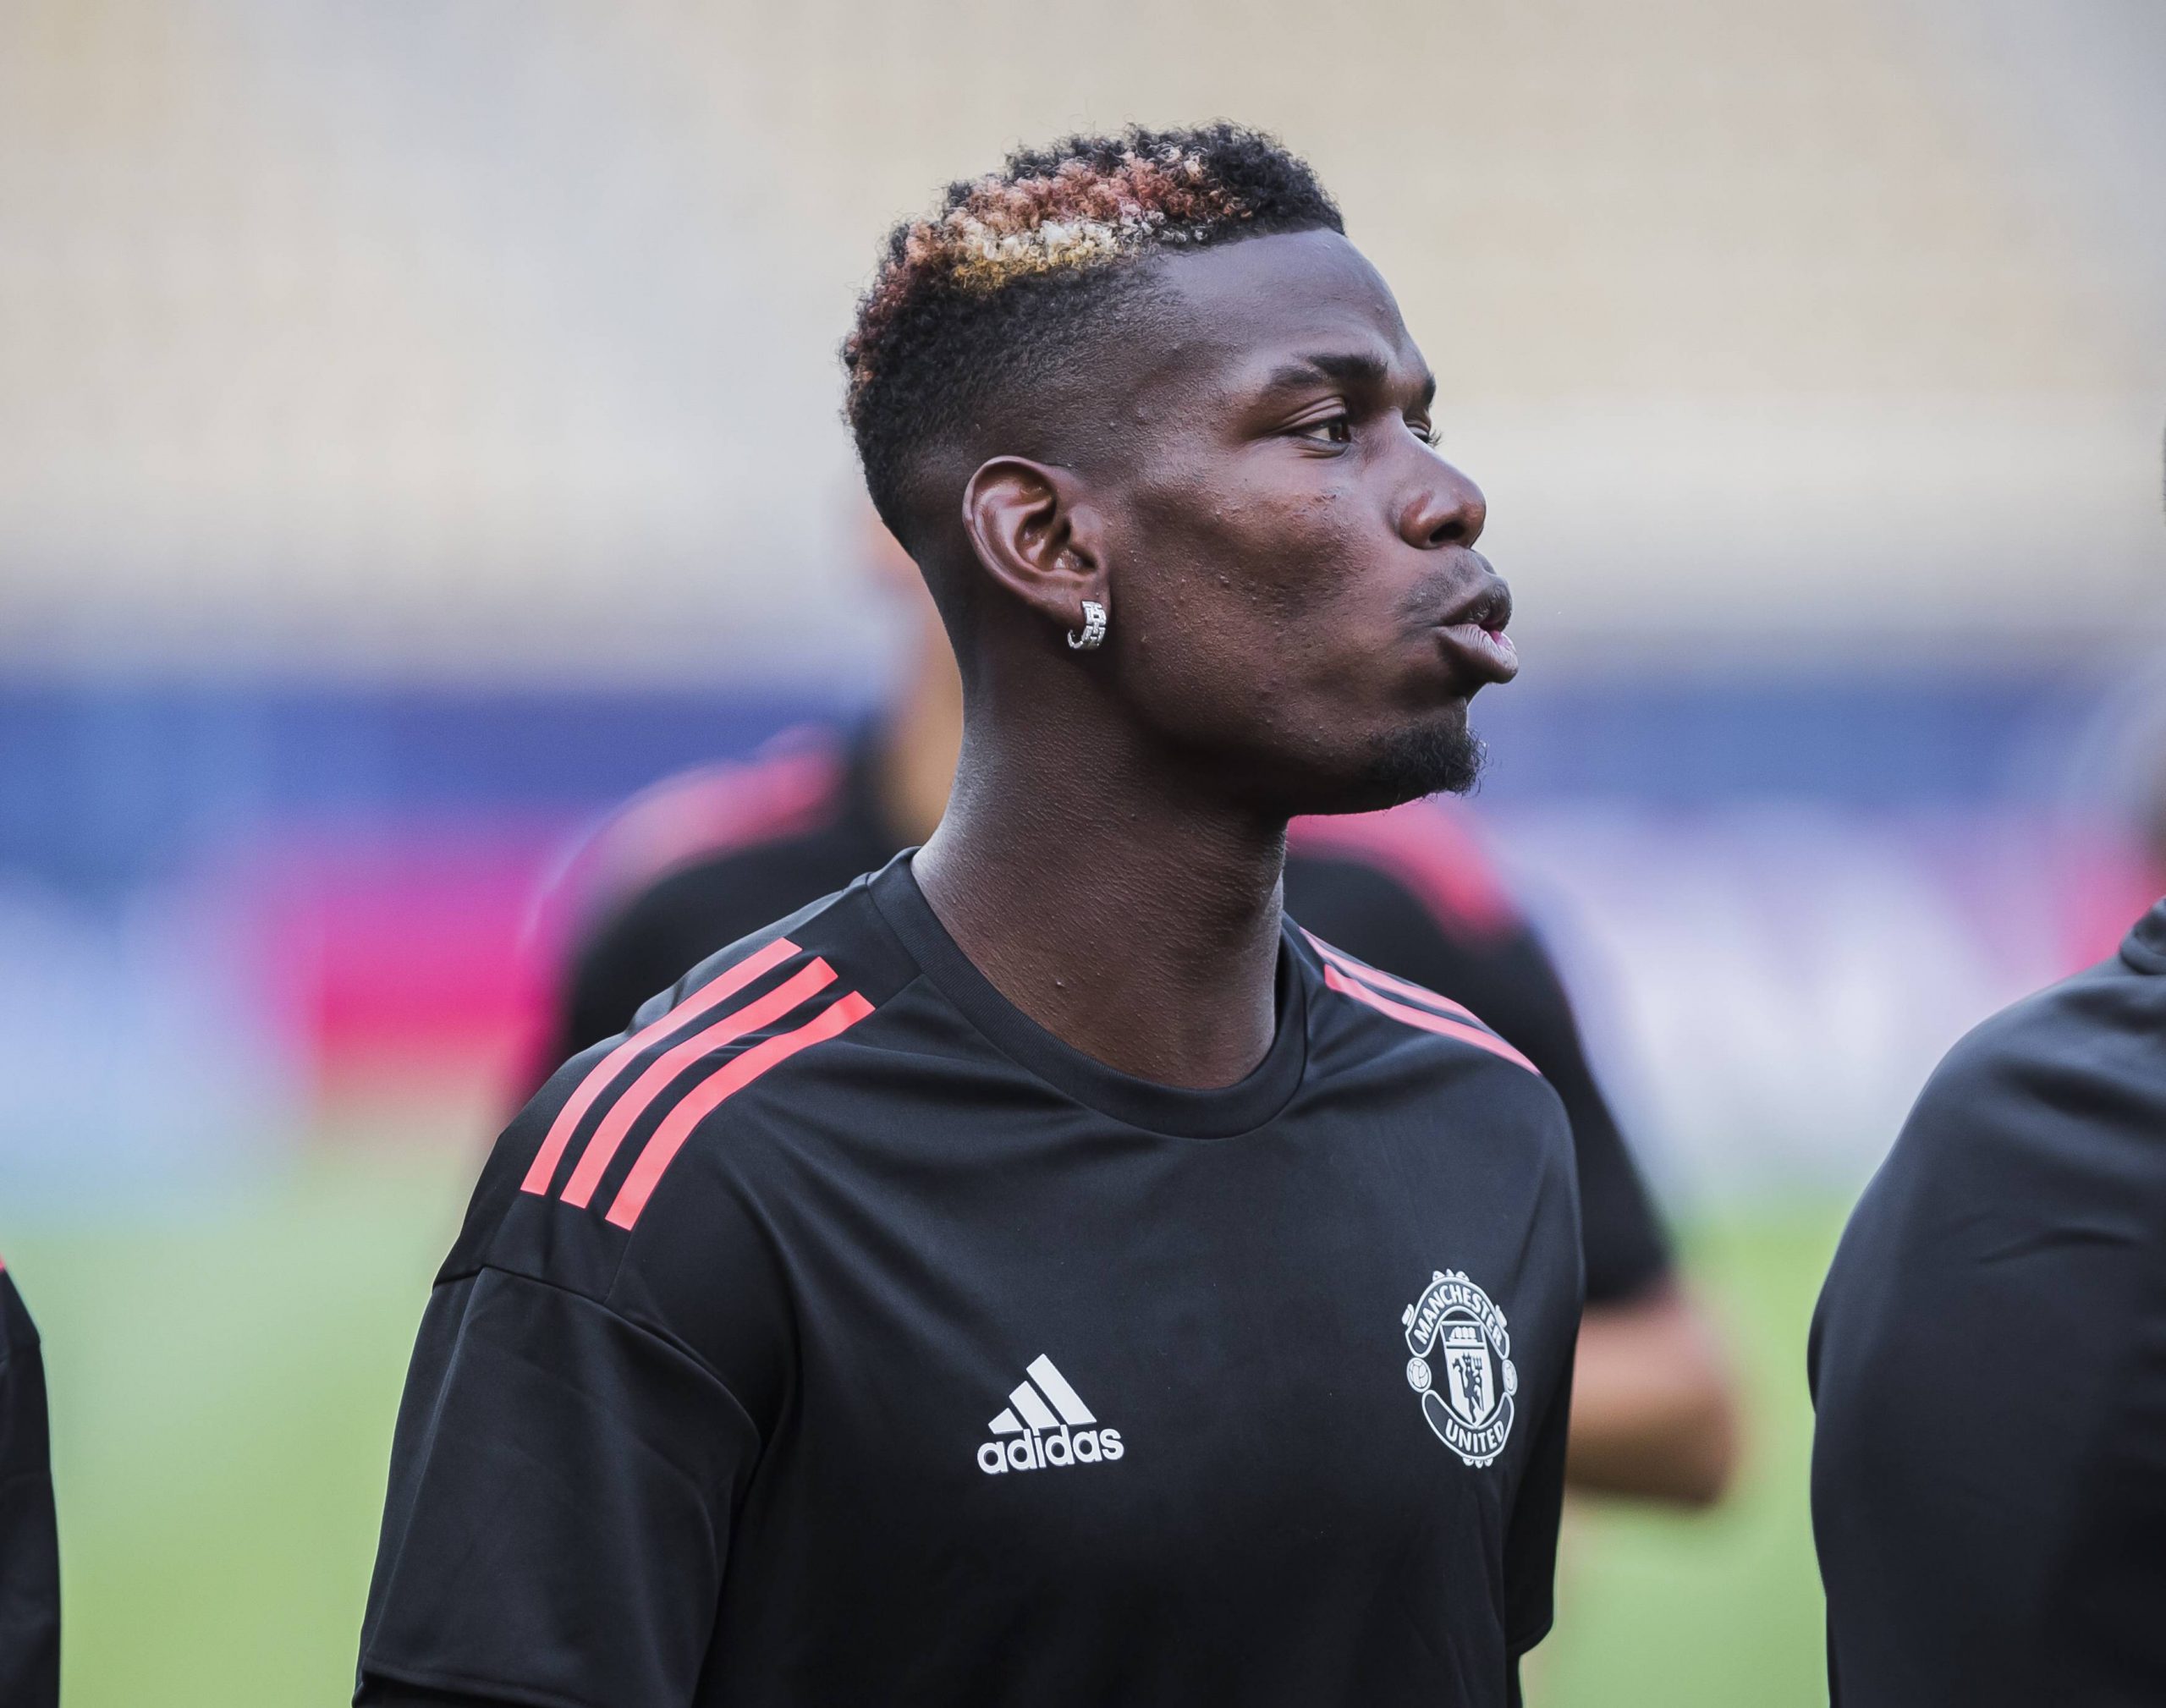 Paul Pogba left Manchester United for nothing last summer, joining Juventus in Italy.